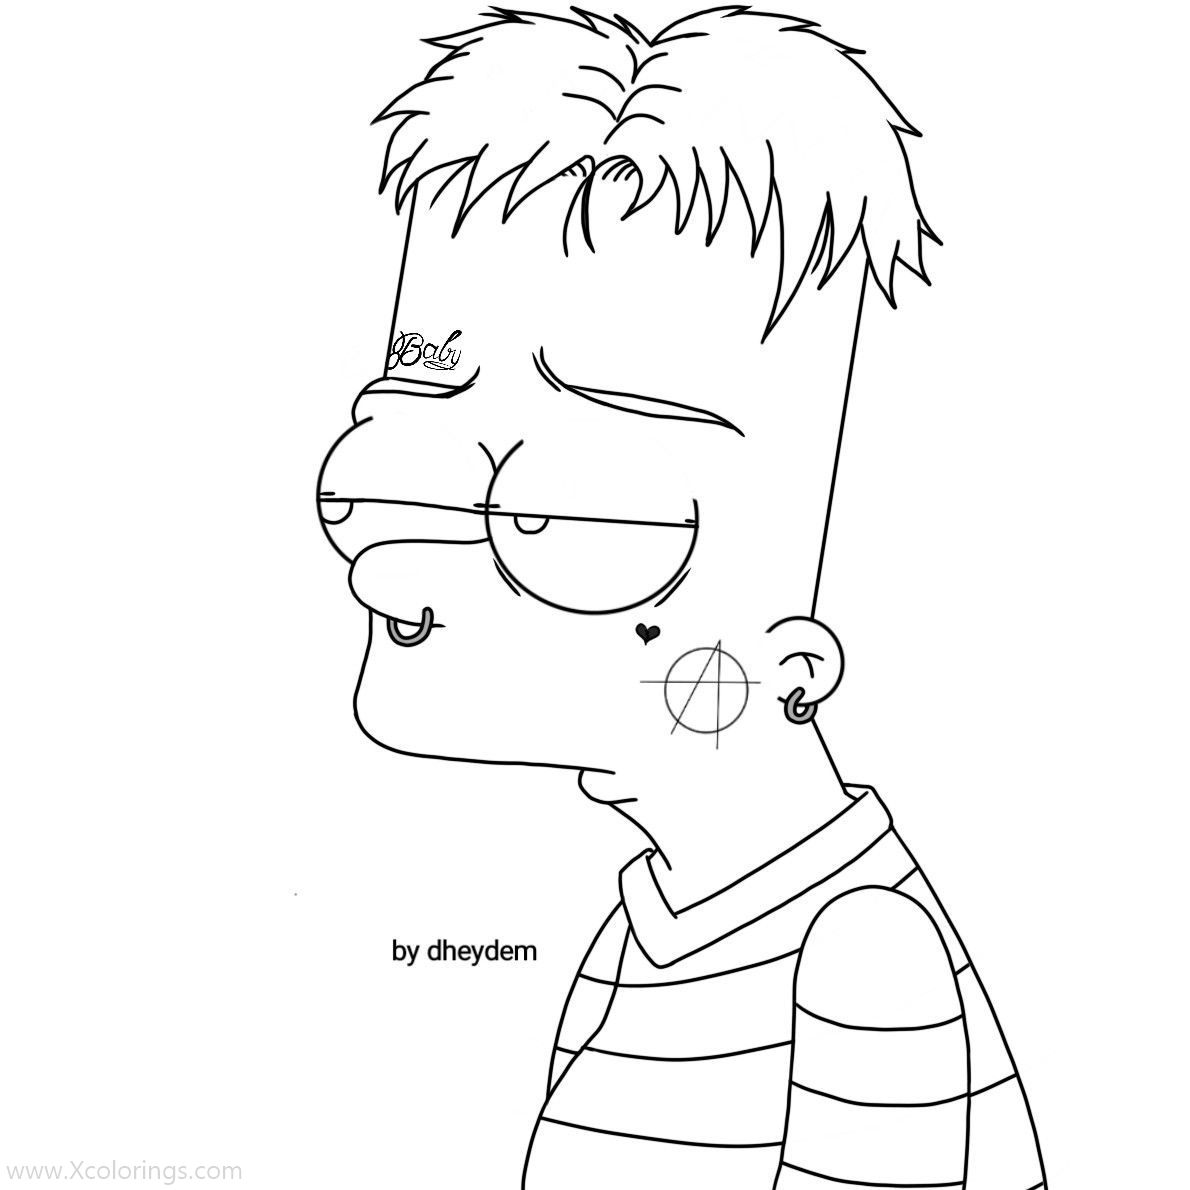 Free Lil Peep Simpson Coloring Pages by dheydem printable